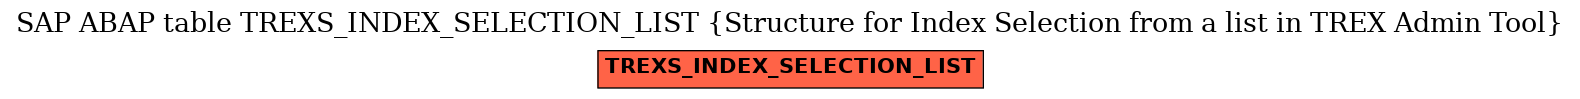 E-R Diagram for table TREXS_INDEX_SELECTION_LIST (Structure for Index Selection from a list in TREX Admin Tool)